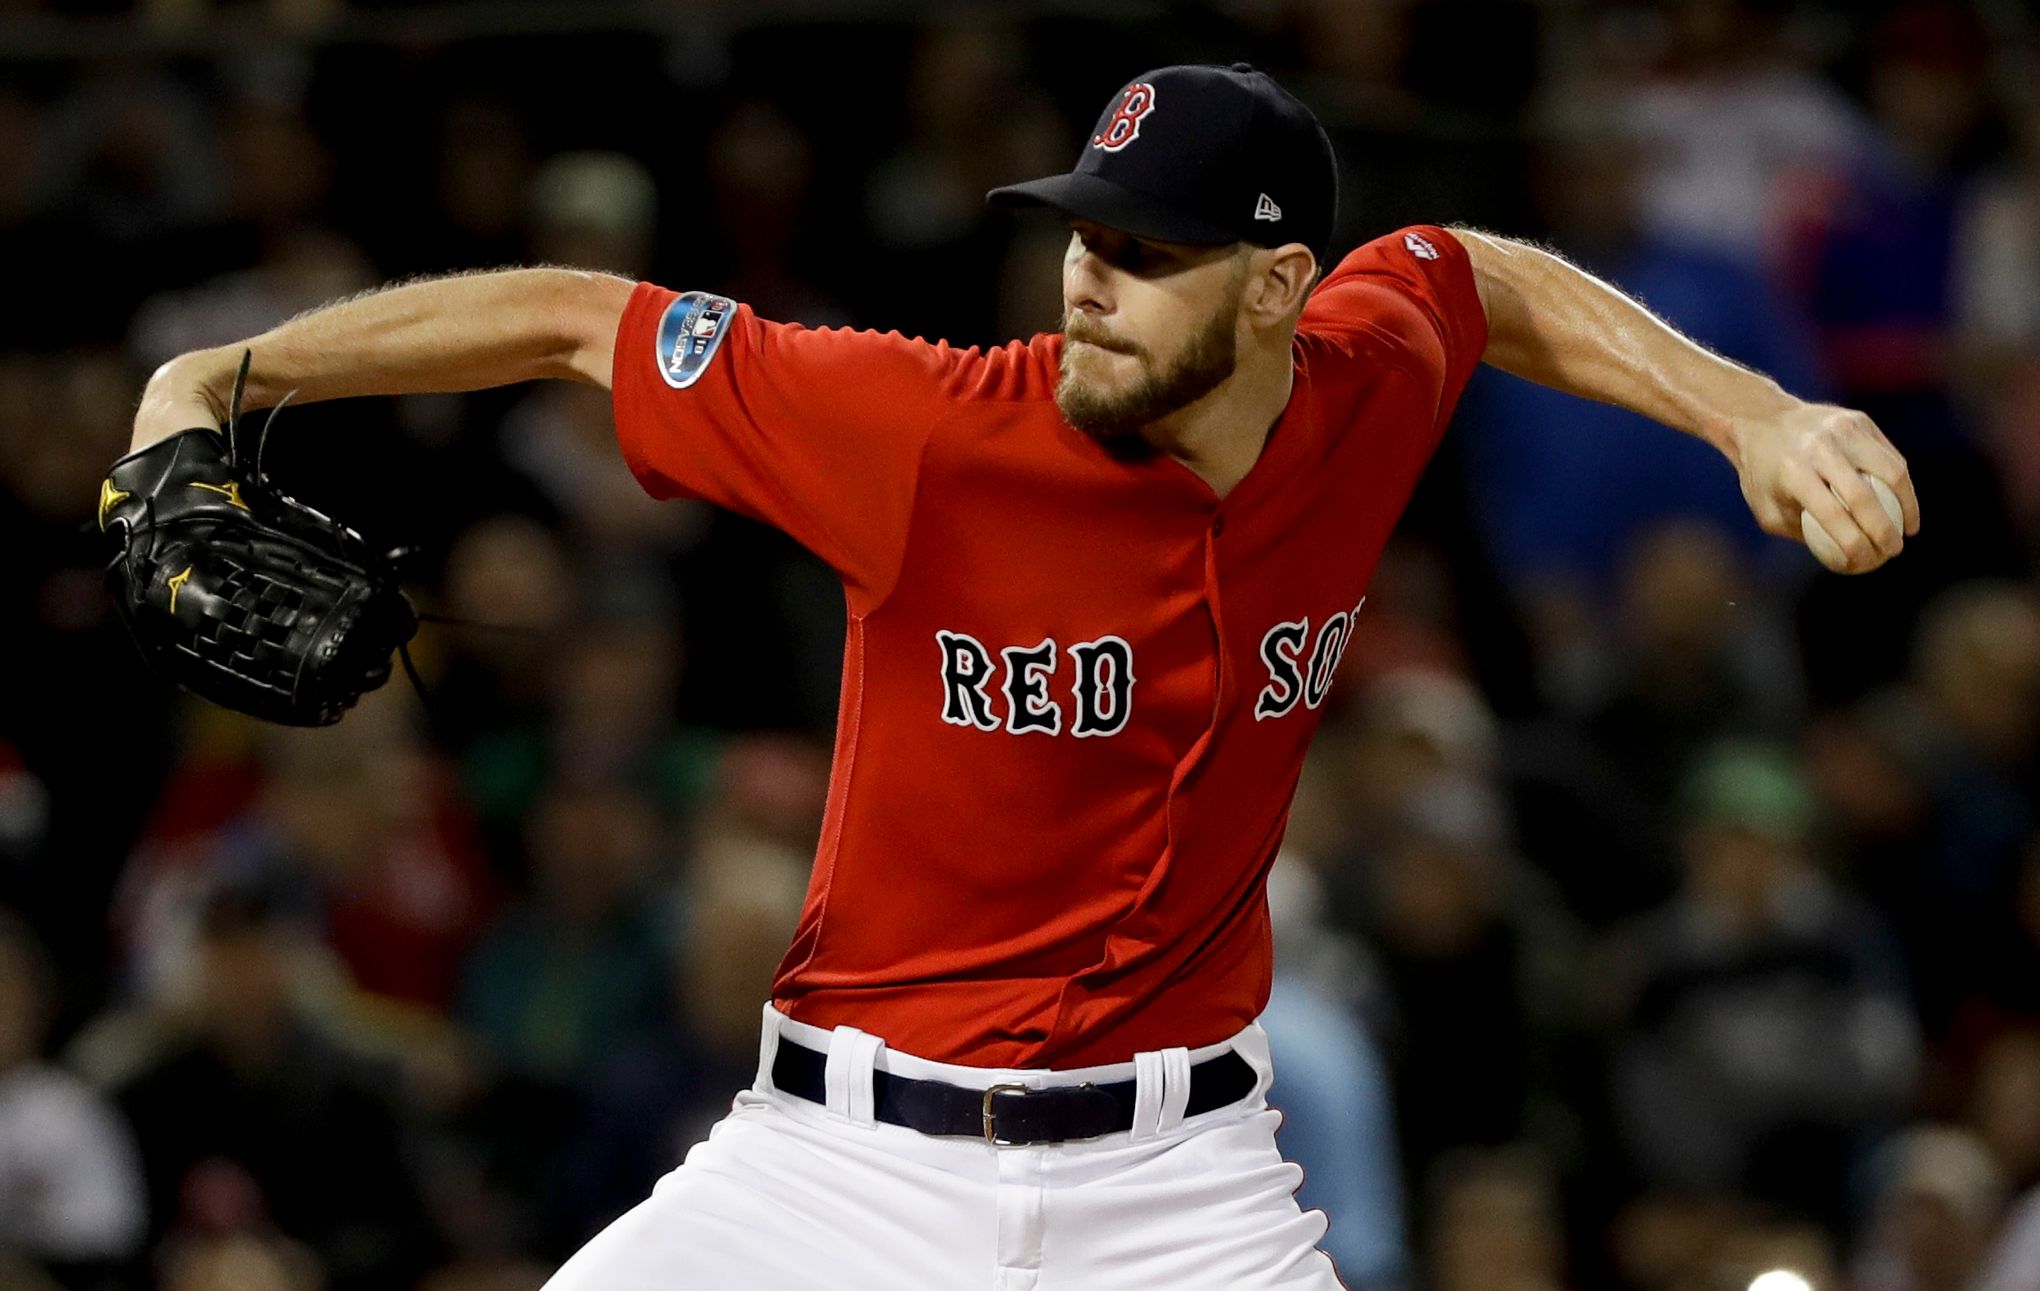 Overcoming a stomach bug is the latest feat in Chris Sale's recent surge